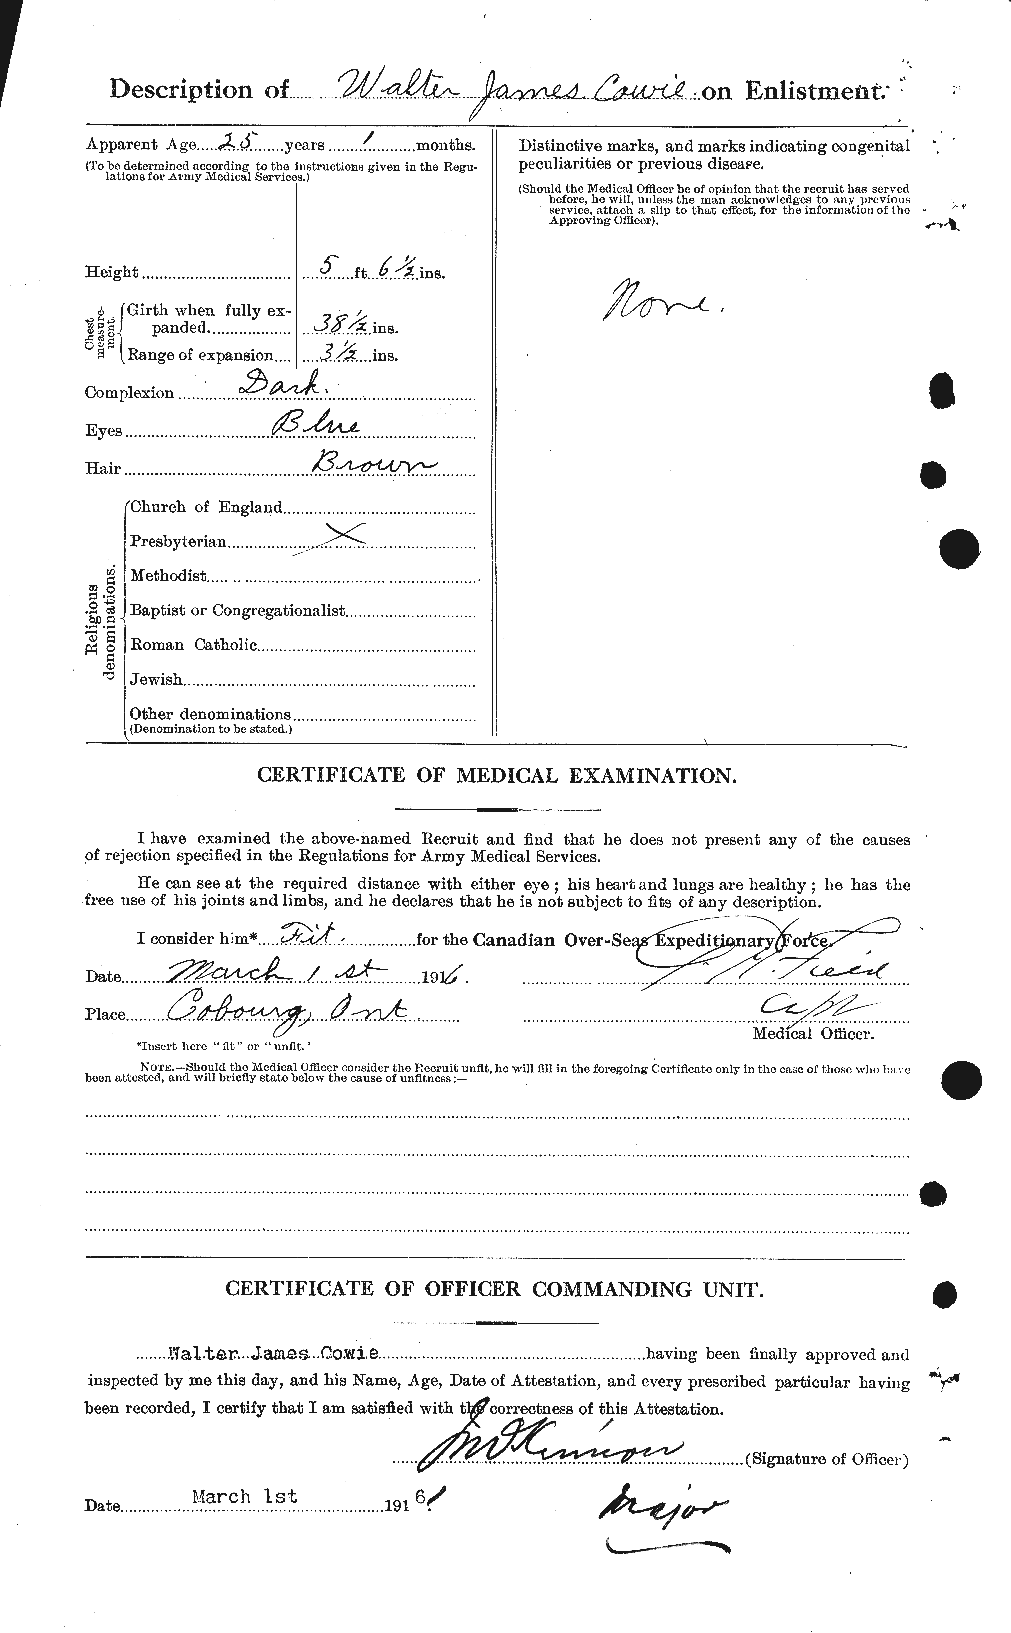 Personnel Records of the First World War - CEF 059869b